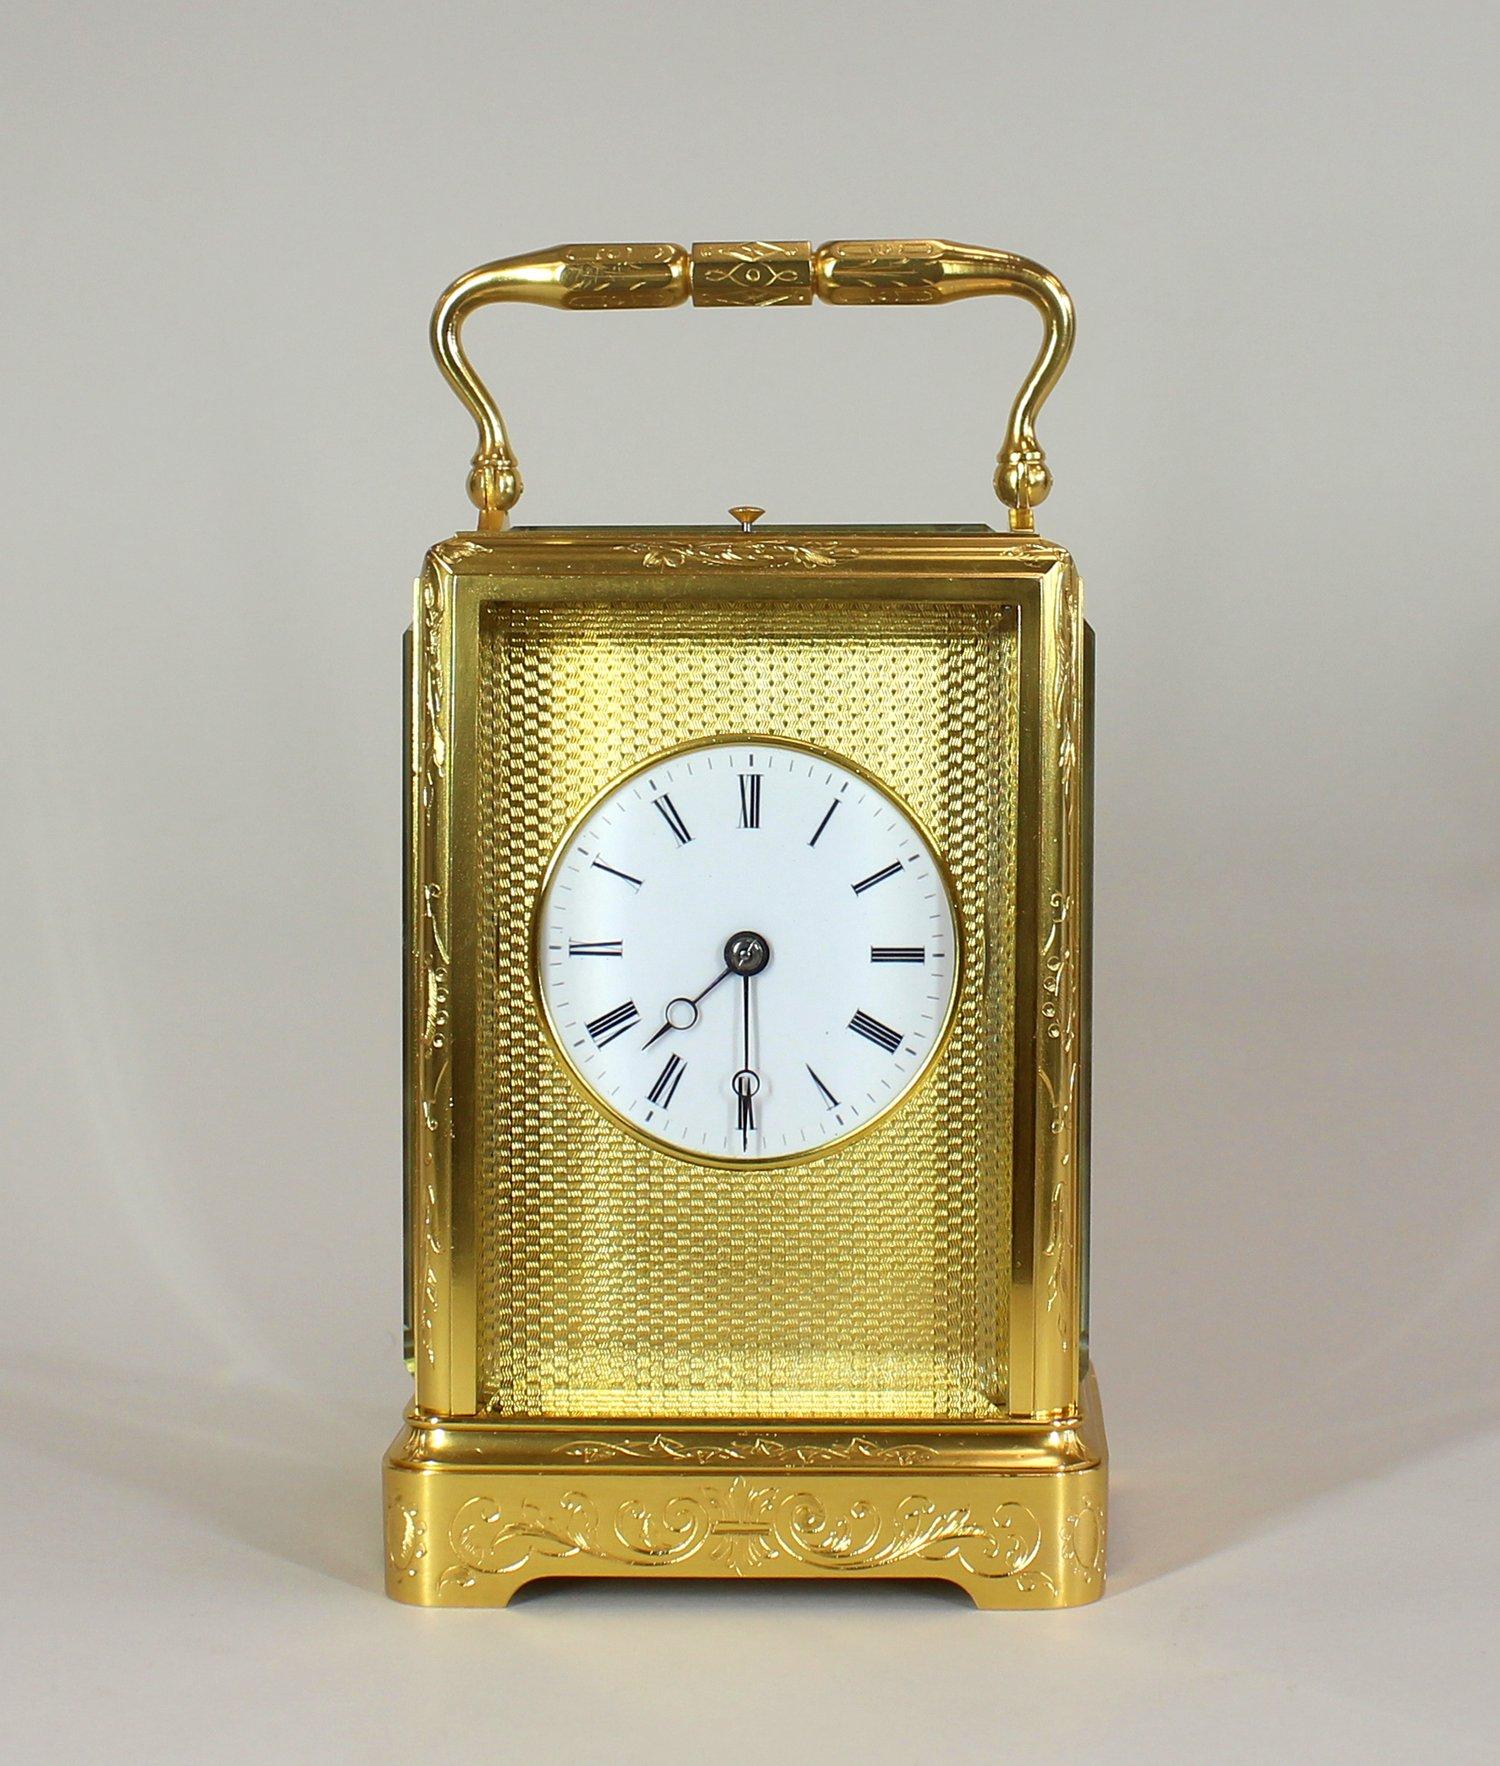 A fine early repeating carriage clock in an engraved one piece case. With a gilt engin turned mask, and a white enamel dial and roman numerals.

The gilded case is engraved with foliate scrollwork, the 8 day repeating movement with English lever